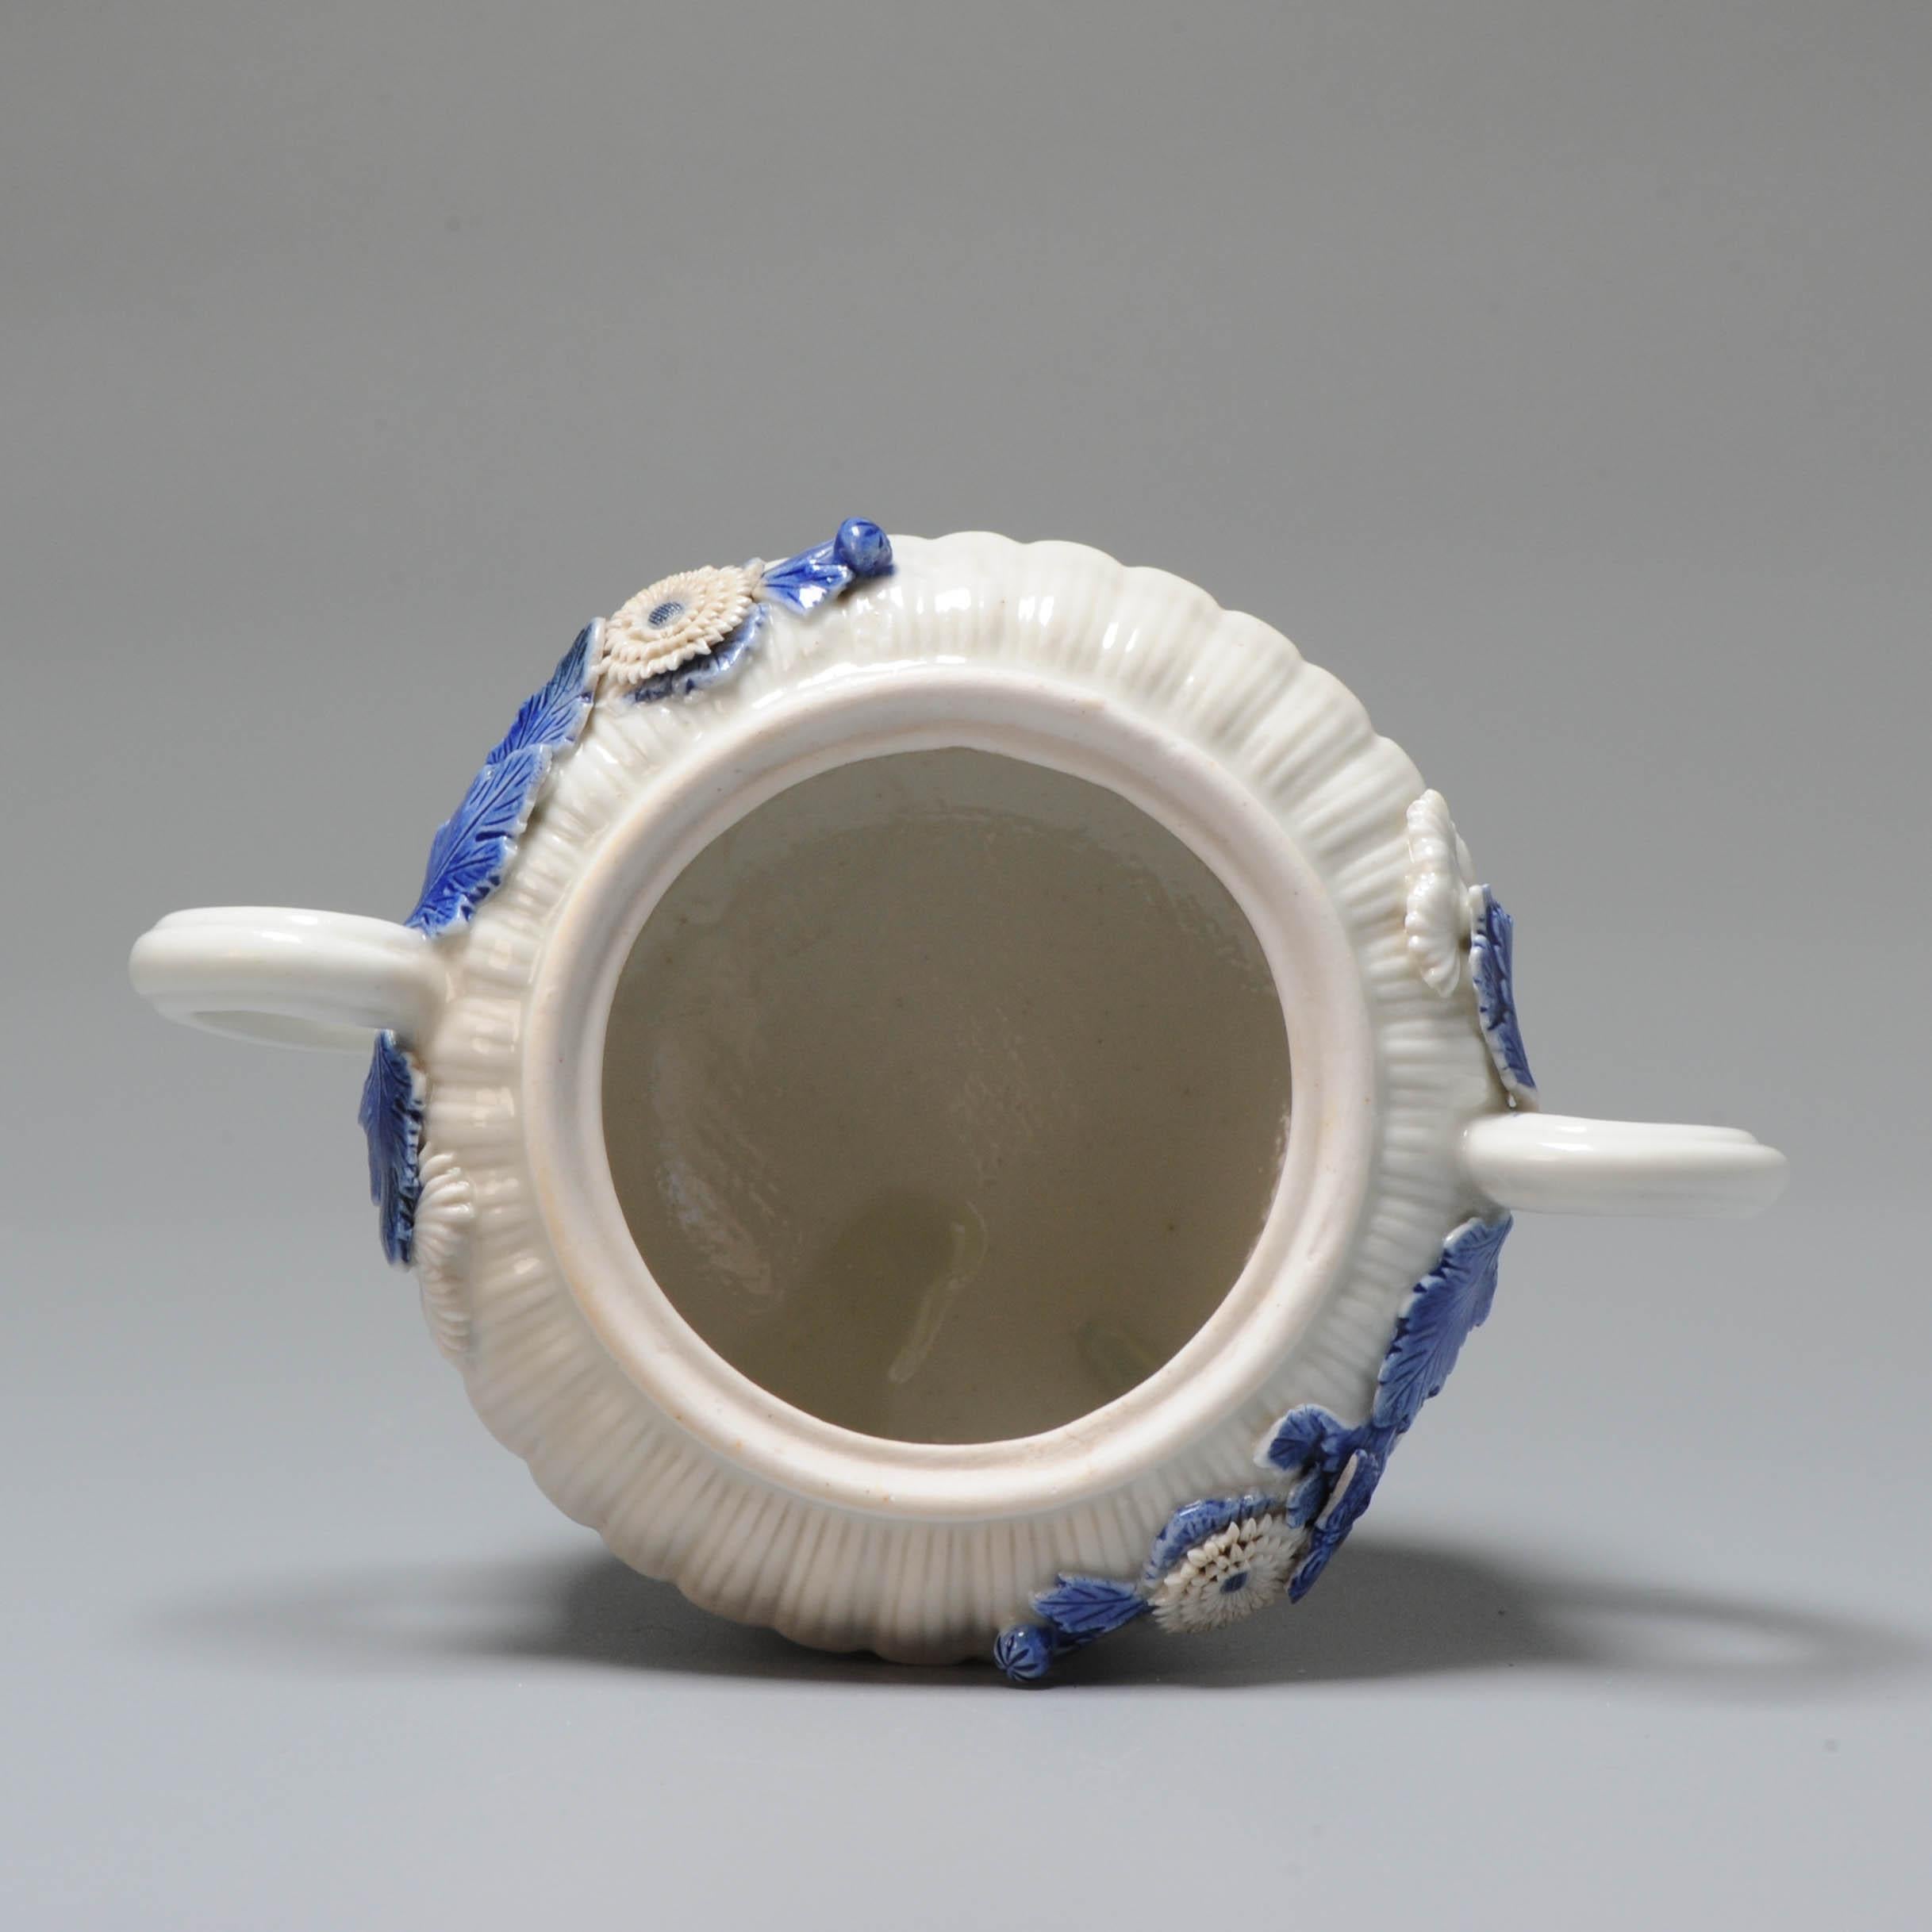 This is a nicely shaped and decorated Sugar pot.

A handmade, hand painted porcelain item with overglaze and underglaze Blue enamel. It has beautiful white porcelain. The flower appliques are so beautiful.

Additional information:
Material: